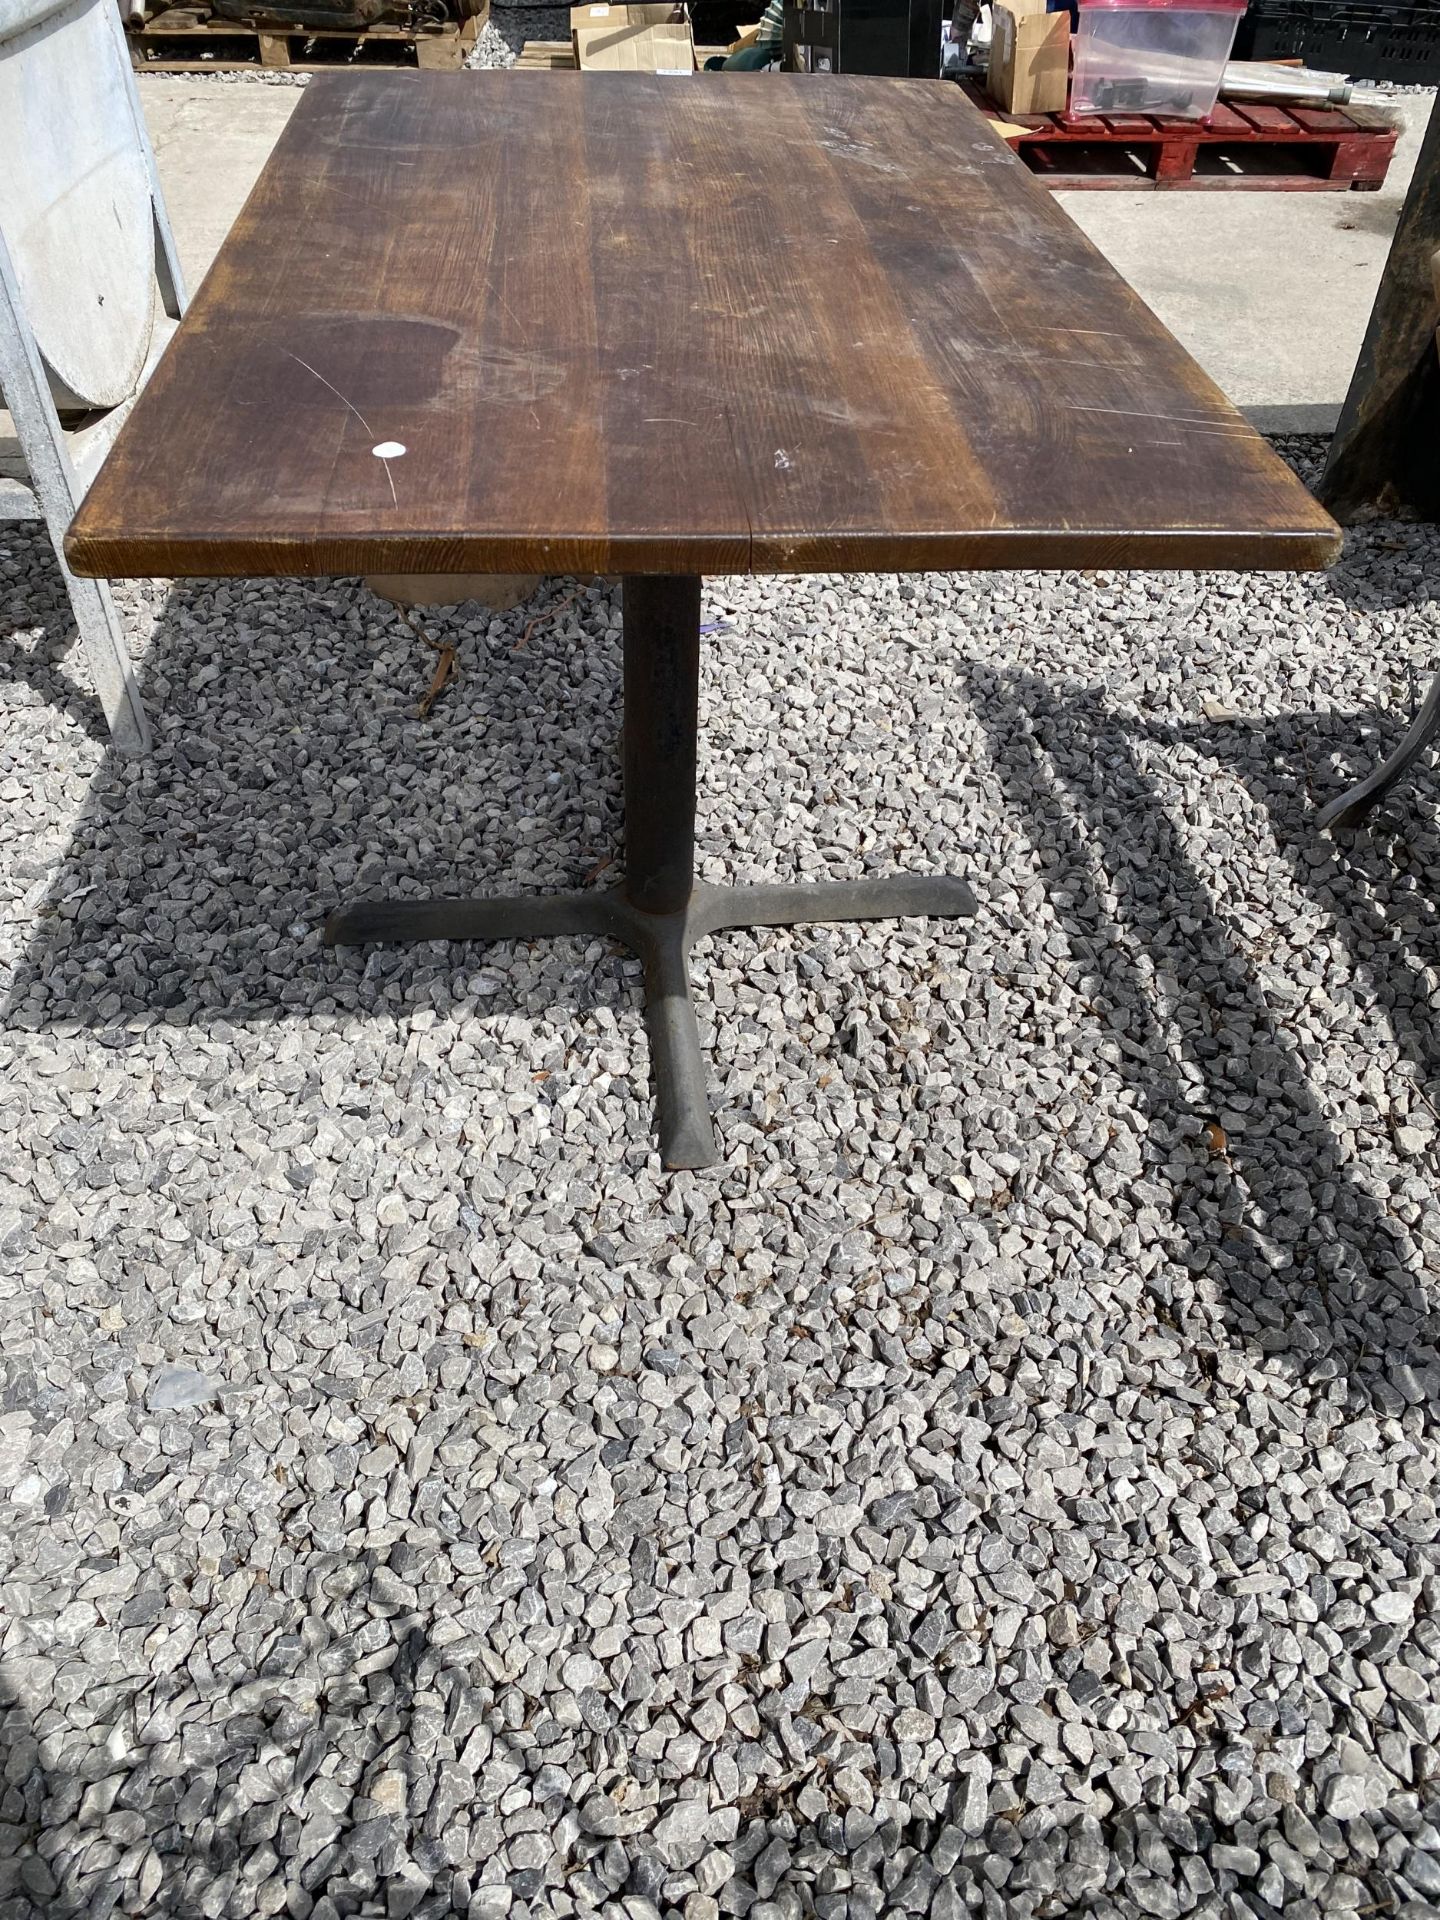 A WOODEN TOPPED PUB TABLE WITH CAST IRON BASE - Image 2 of 3